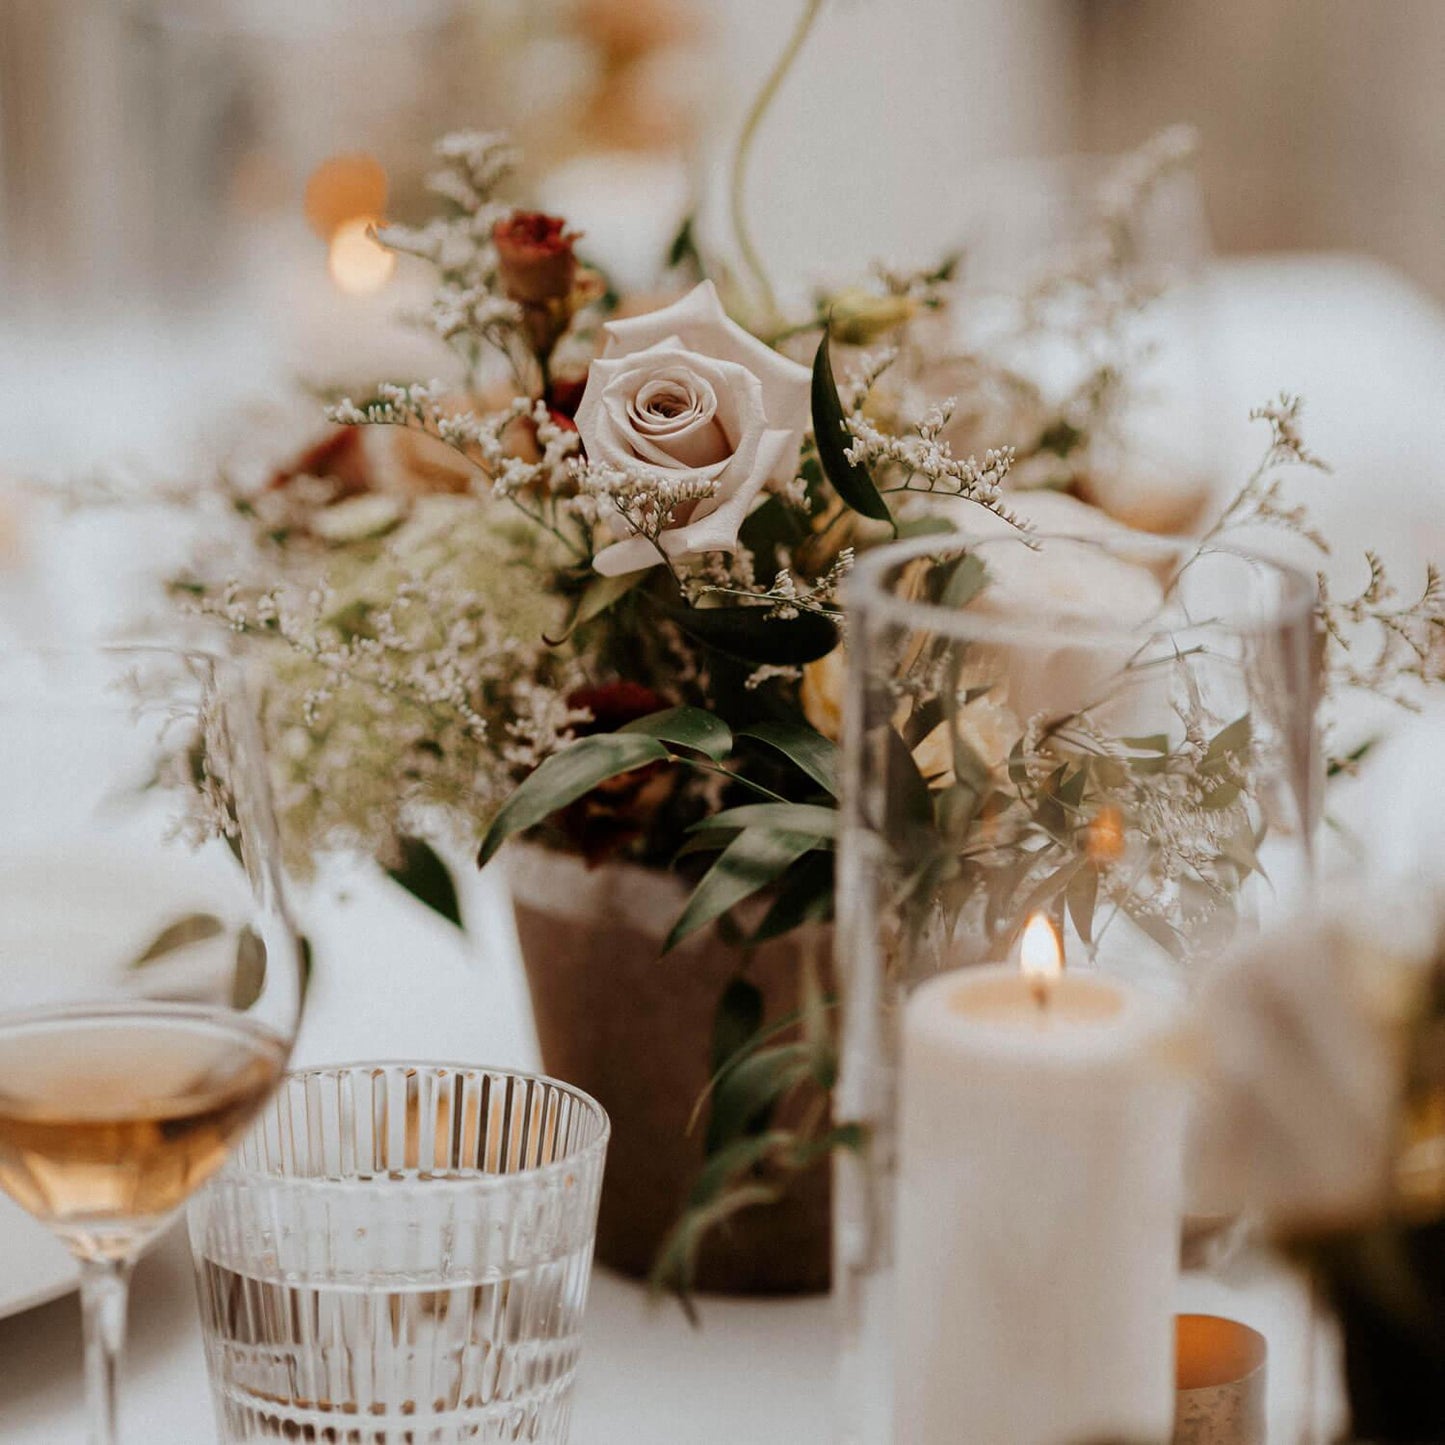 Load image into Gallery viewer, A close-up of a table setting featuring a floral centerpiece, lit candles, and glassware. Order online for wedding &amp;amp; event flowers from the best florist in Toronto near you.
